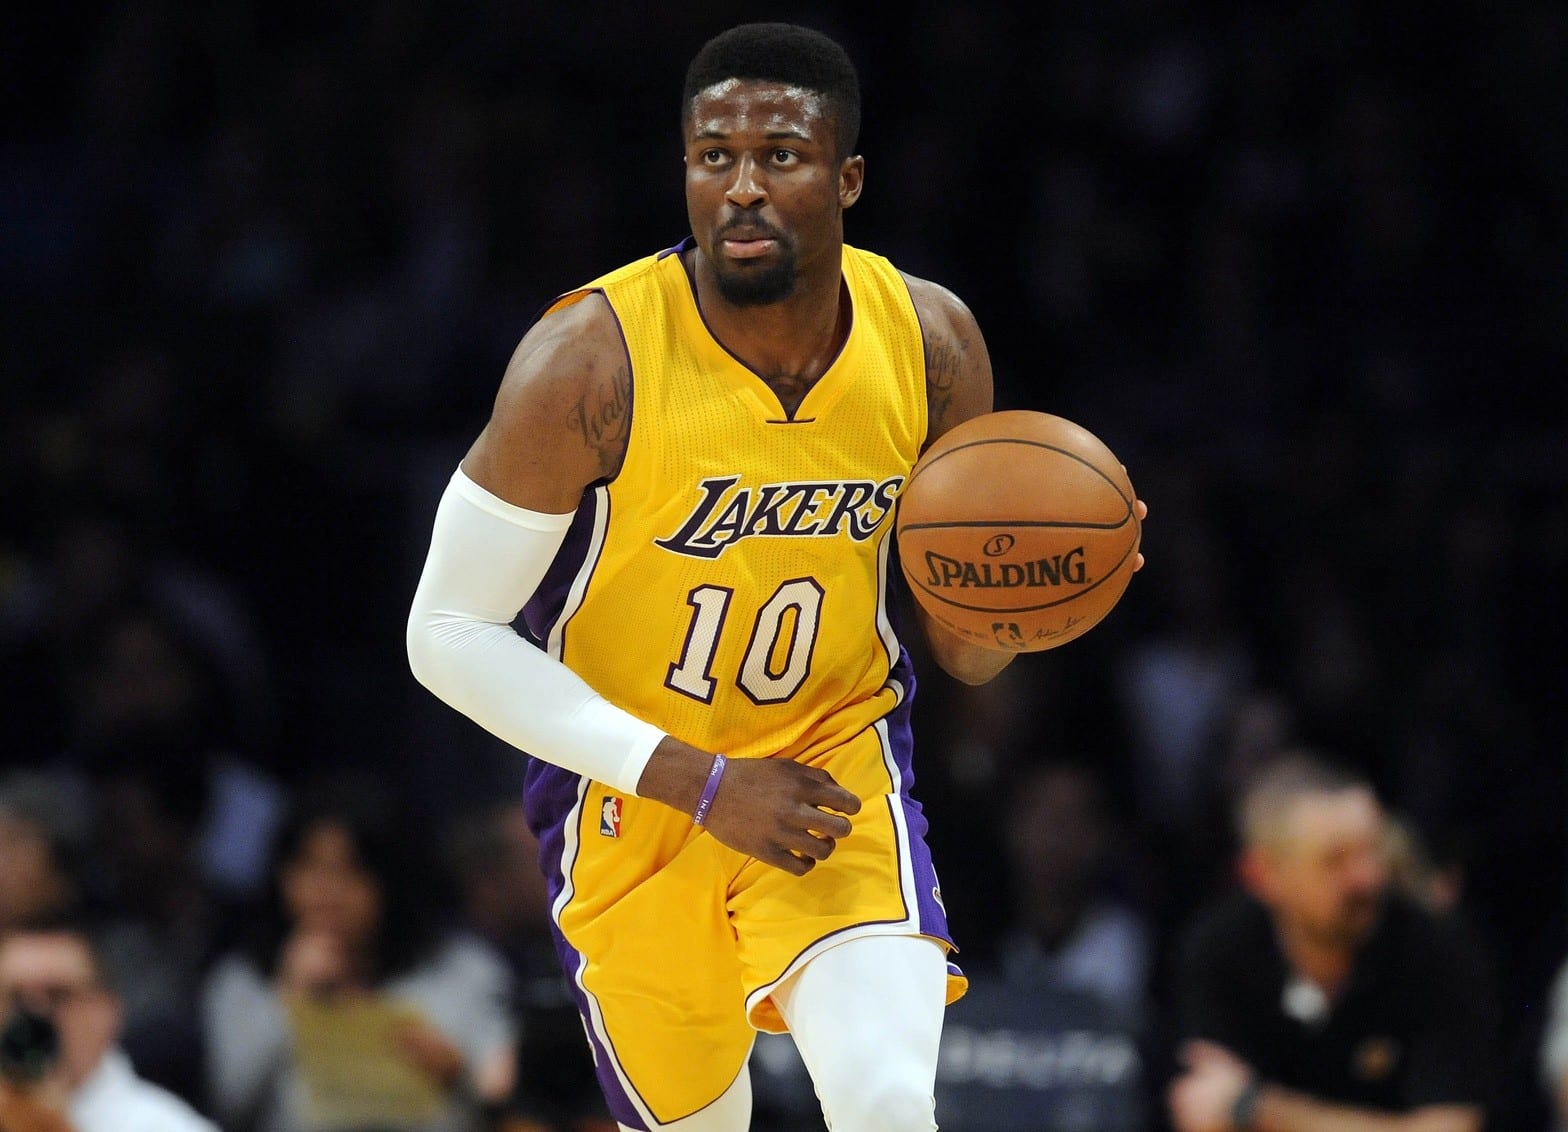 Lakers News: Luke Walton Believes David Nwaba Deserves Second 10-day Contract